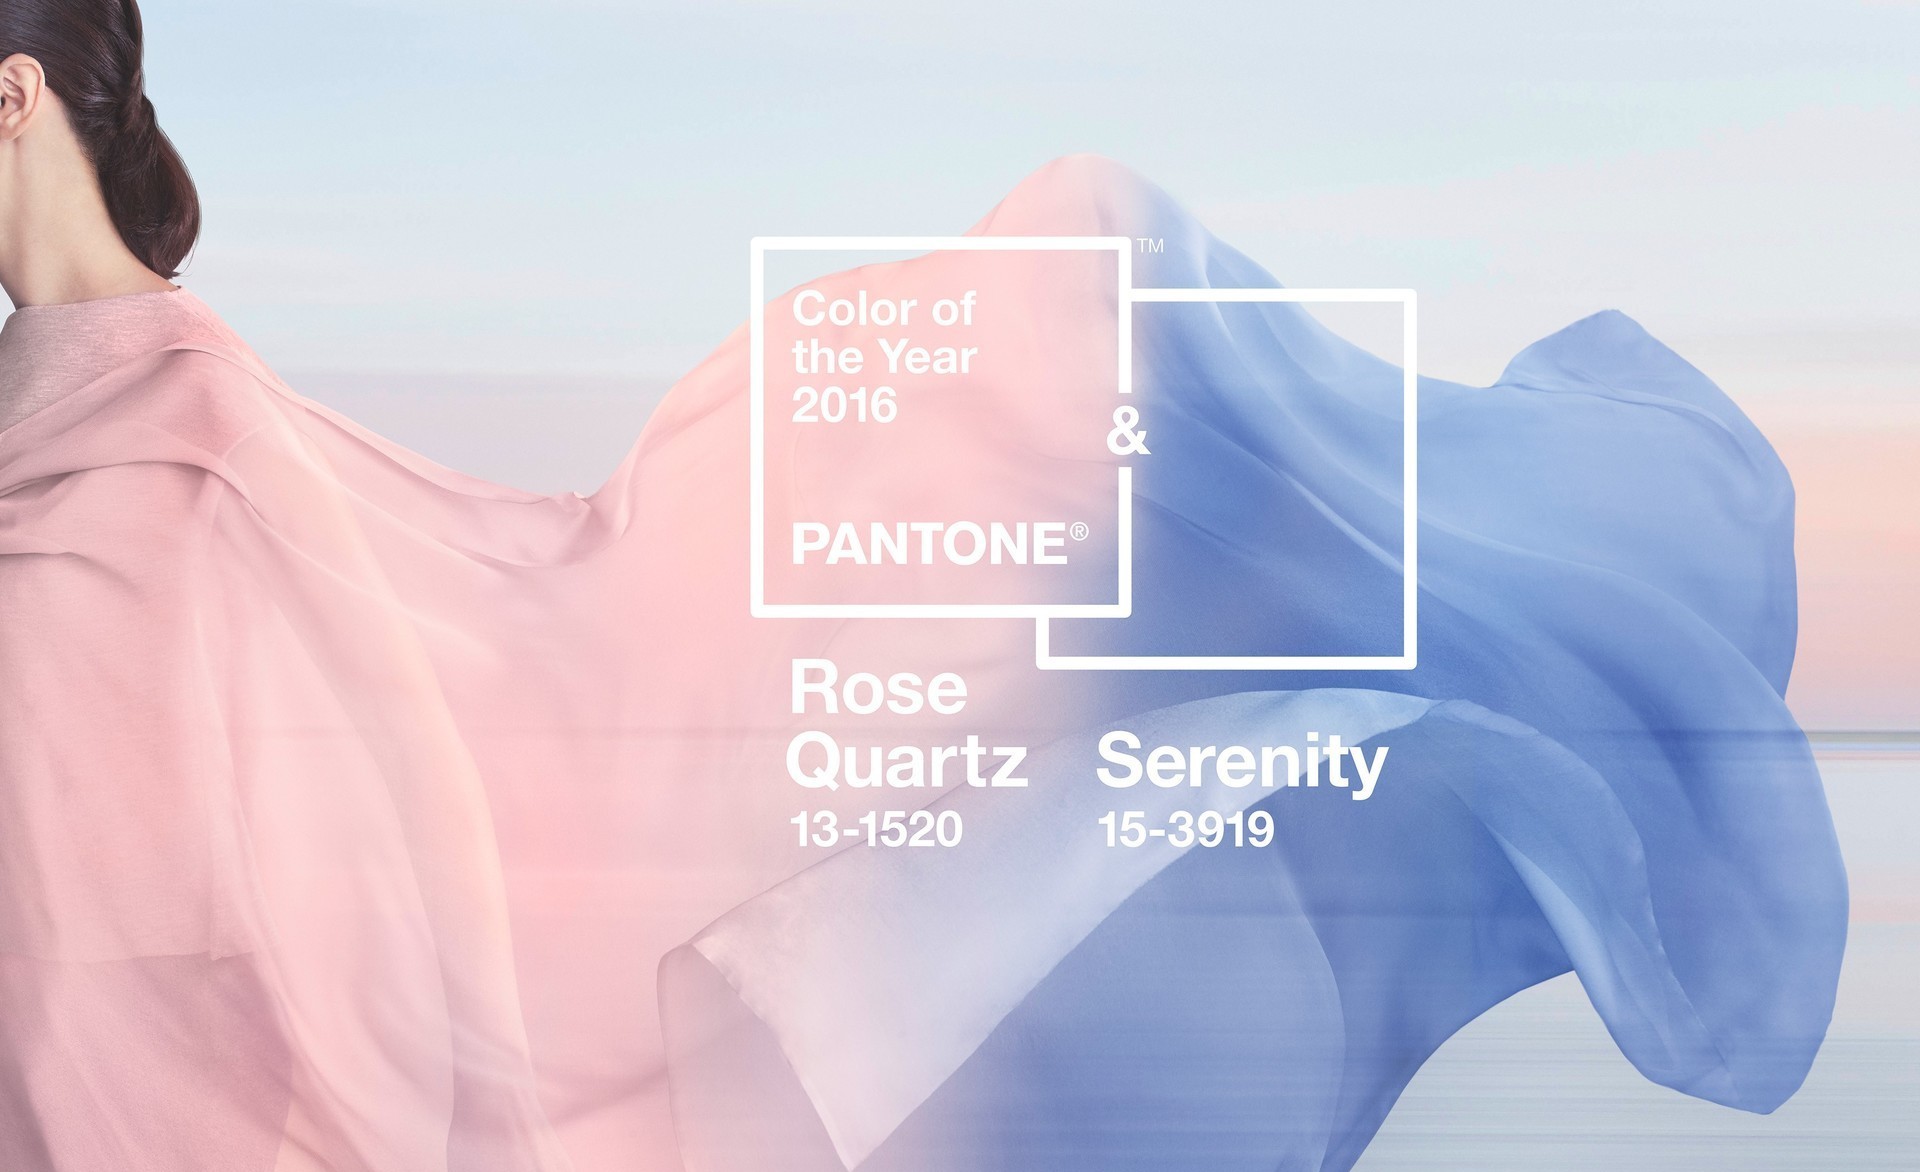 color of the year 2016 and pantone rose quartz 13-1520